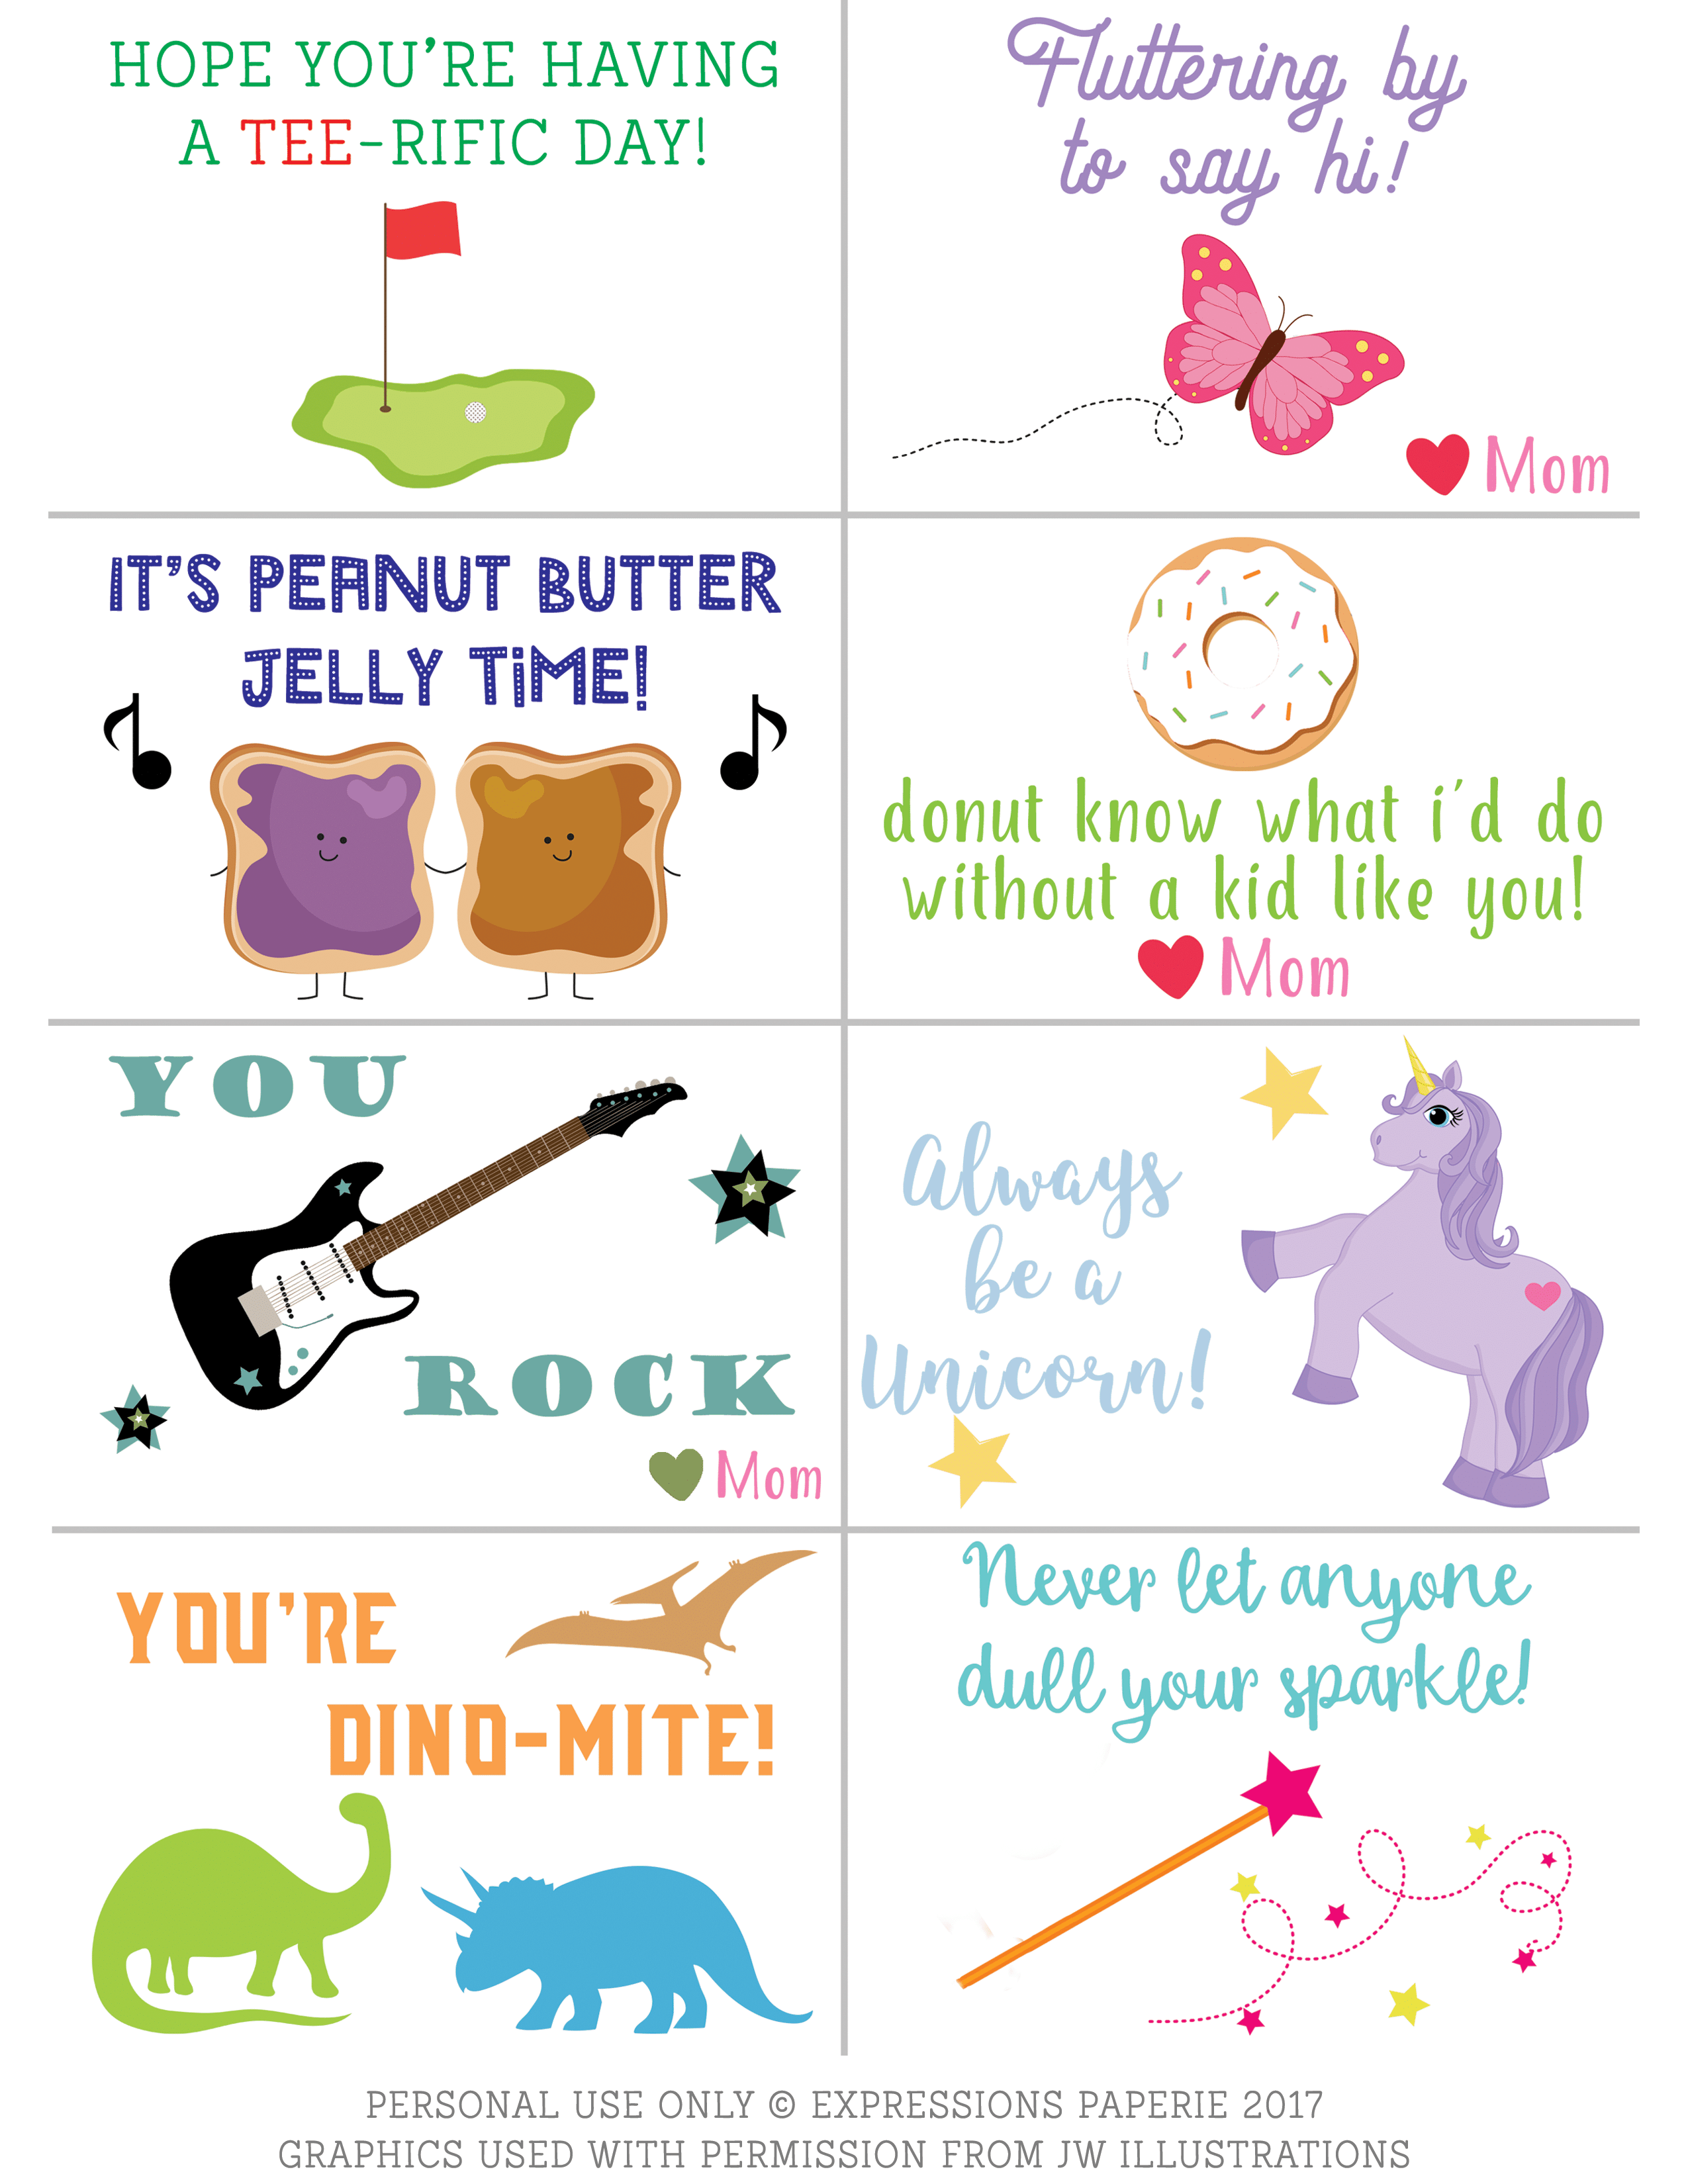 South Your Mouth: Lunchbox Notes